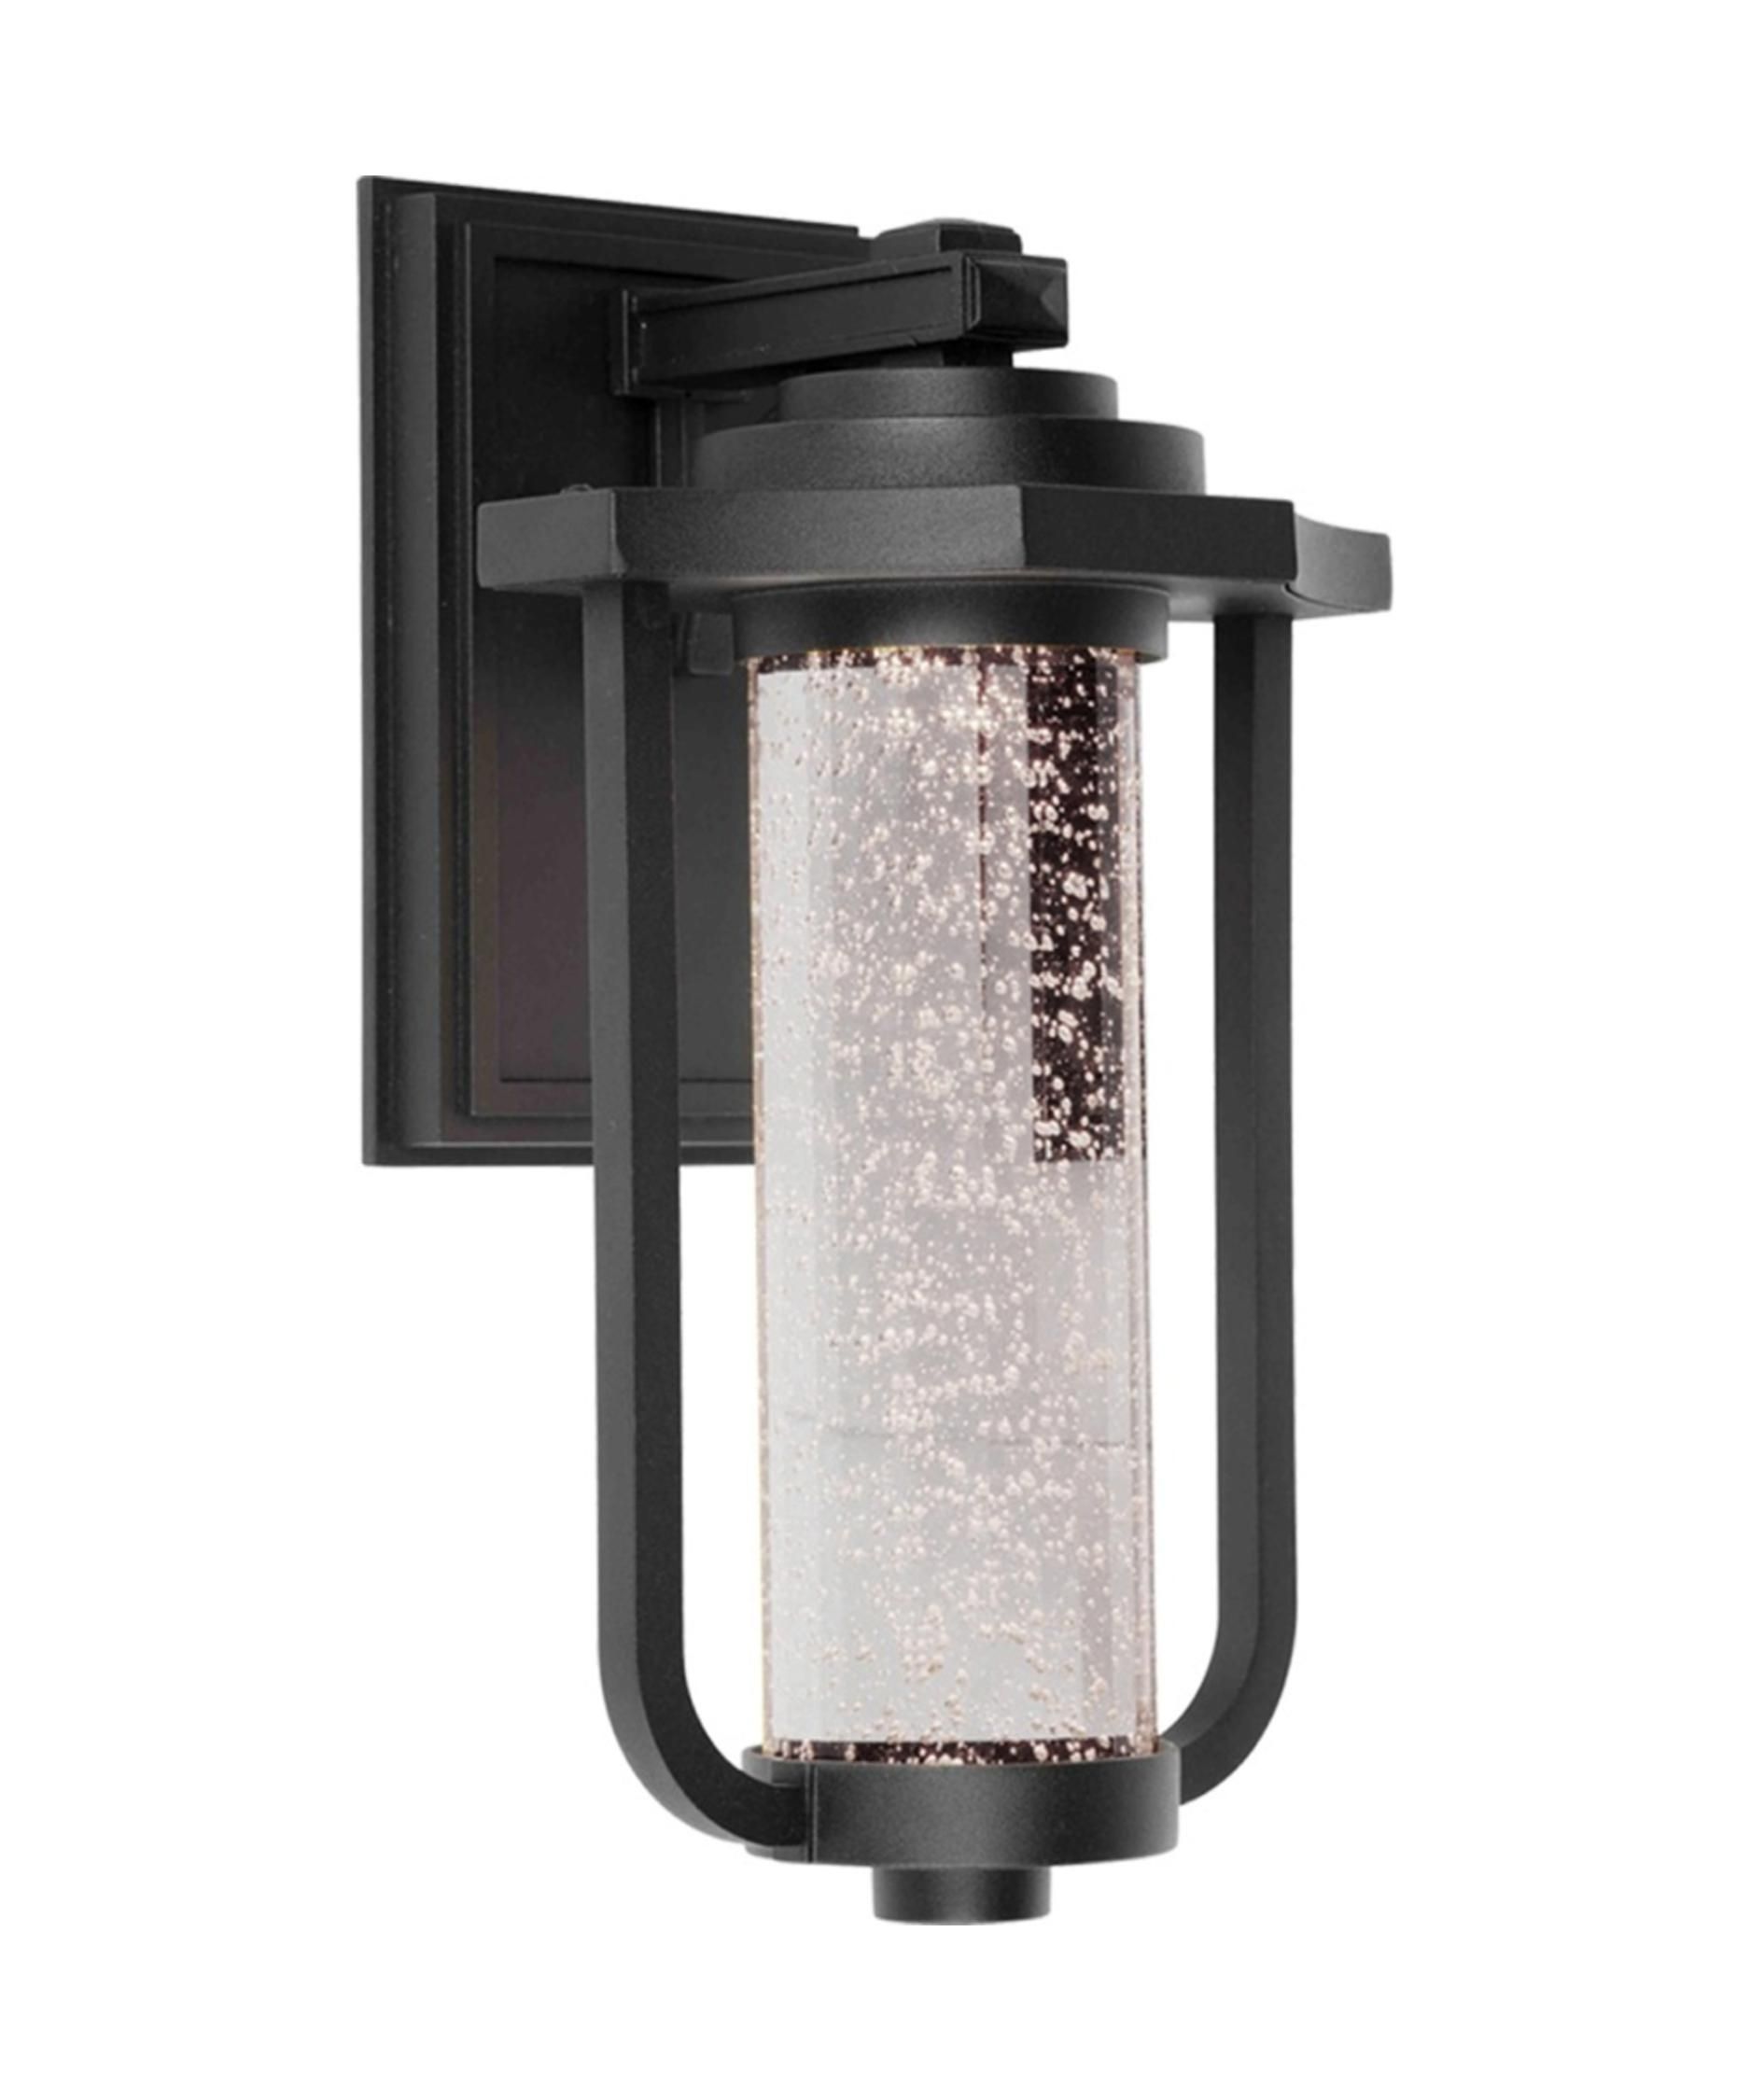 Marvellous Outdoor Wall Light Fixtures Large Tube Of Glass Material Throughout Outdoor Wall Sconce Lighting Fixtures (View 6 of 15)